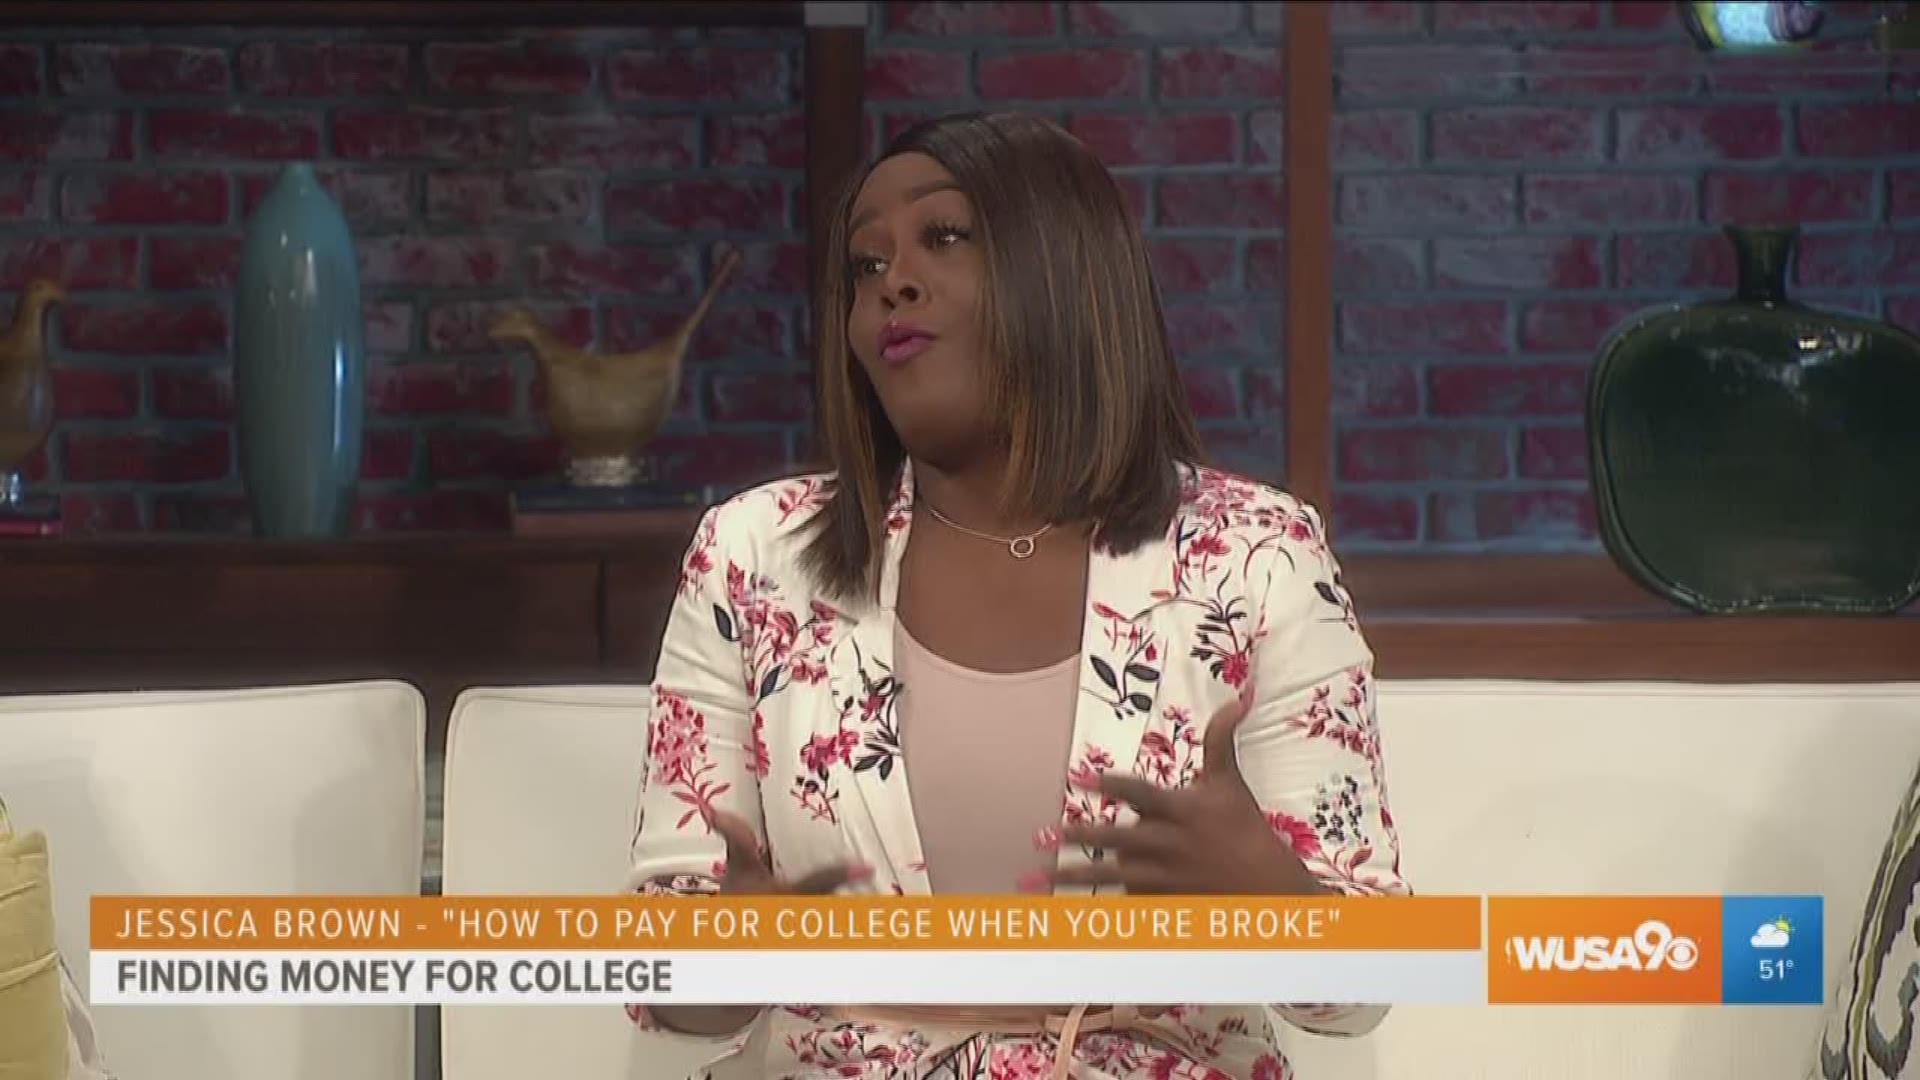 Jessica Brown, the college gurl, discusses the financial burden of many college students who are in debt and what they can to do to ease their financial burden